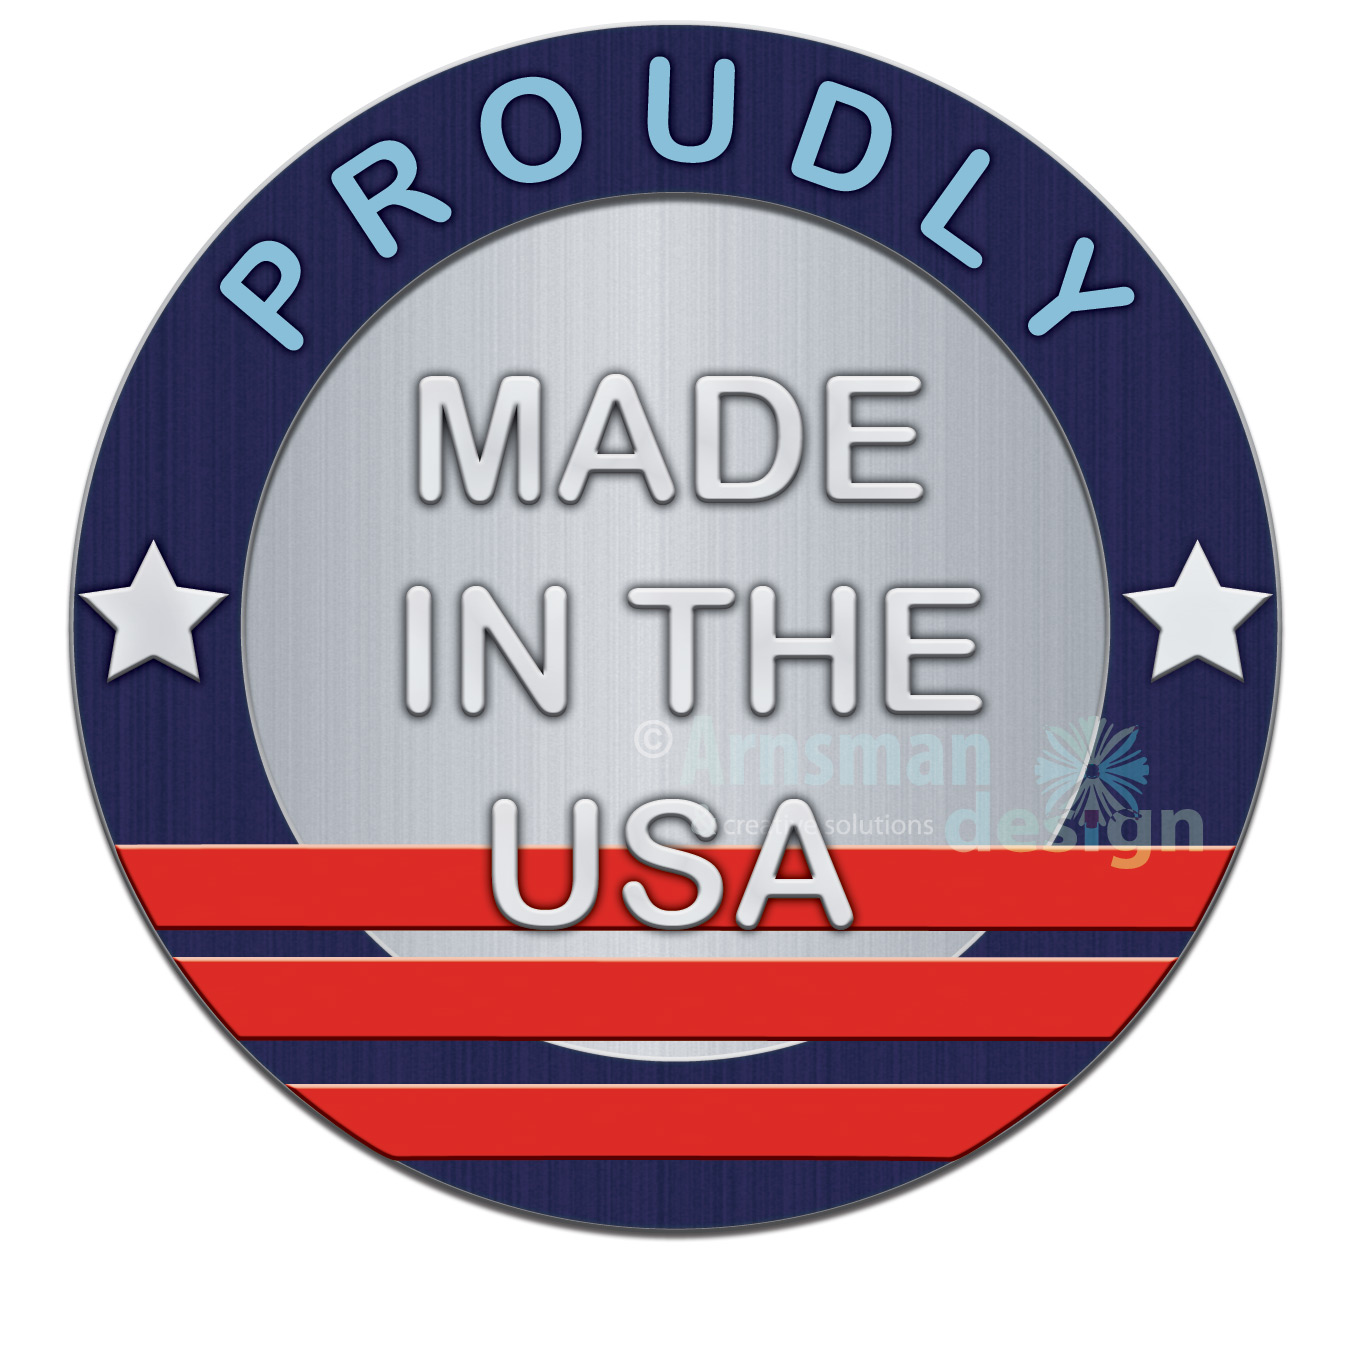 Made in the USA Badge Icon by Connie Arnsman